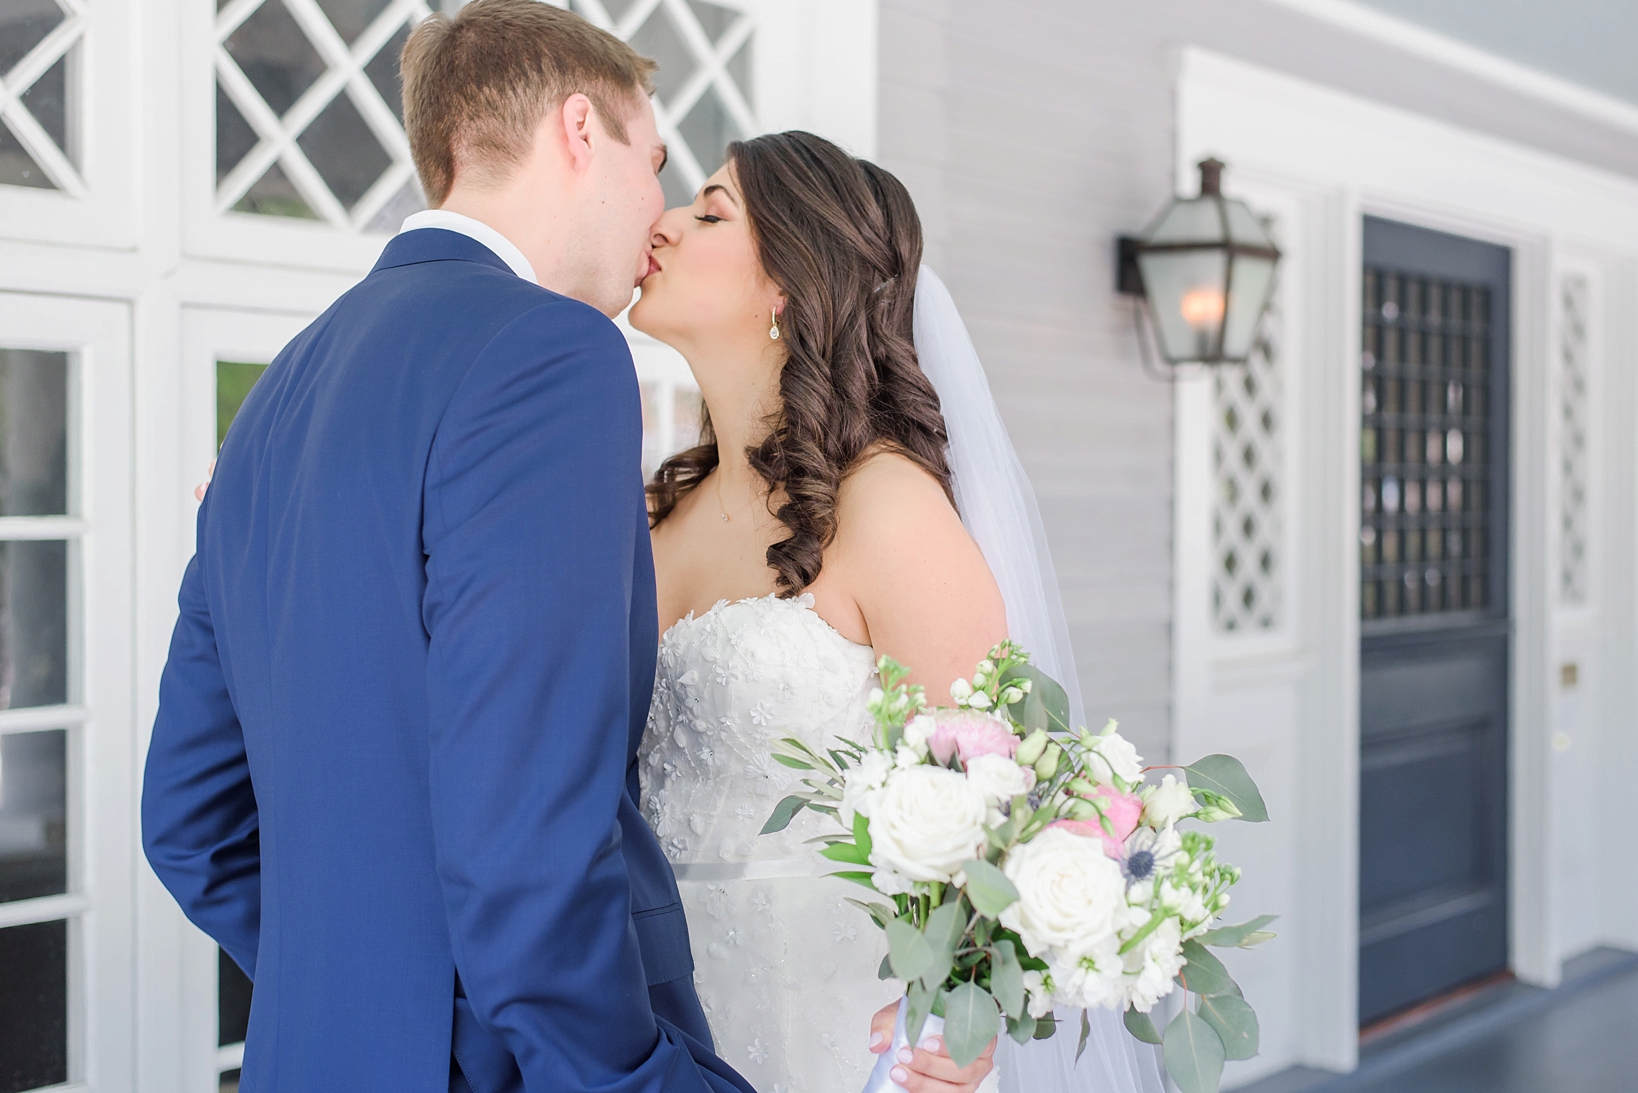 Bride and Groom kiss after seeing each other for the first time on their wedding day